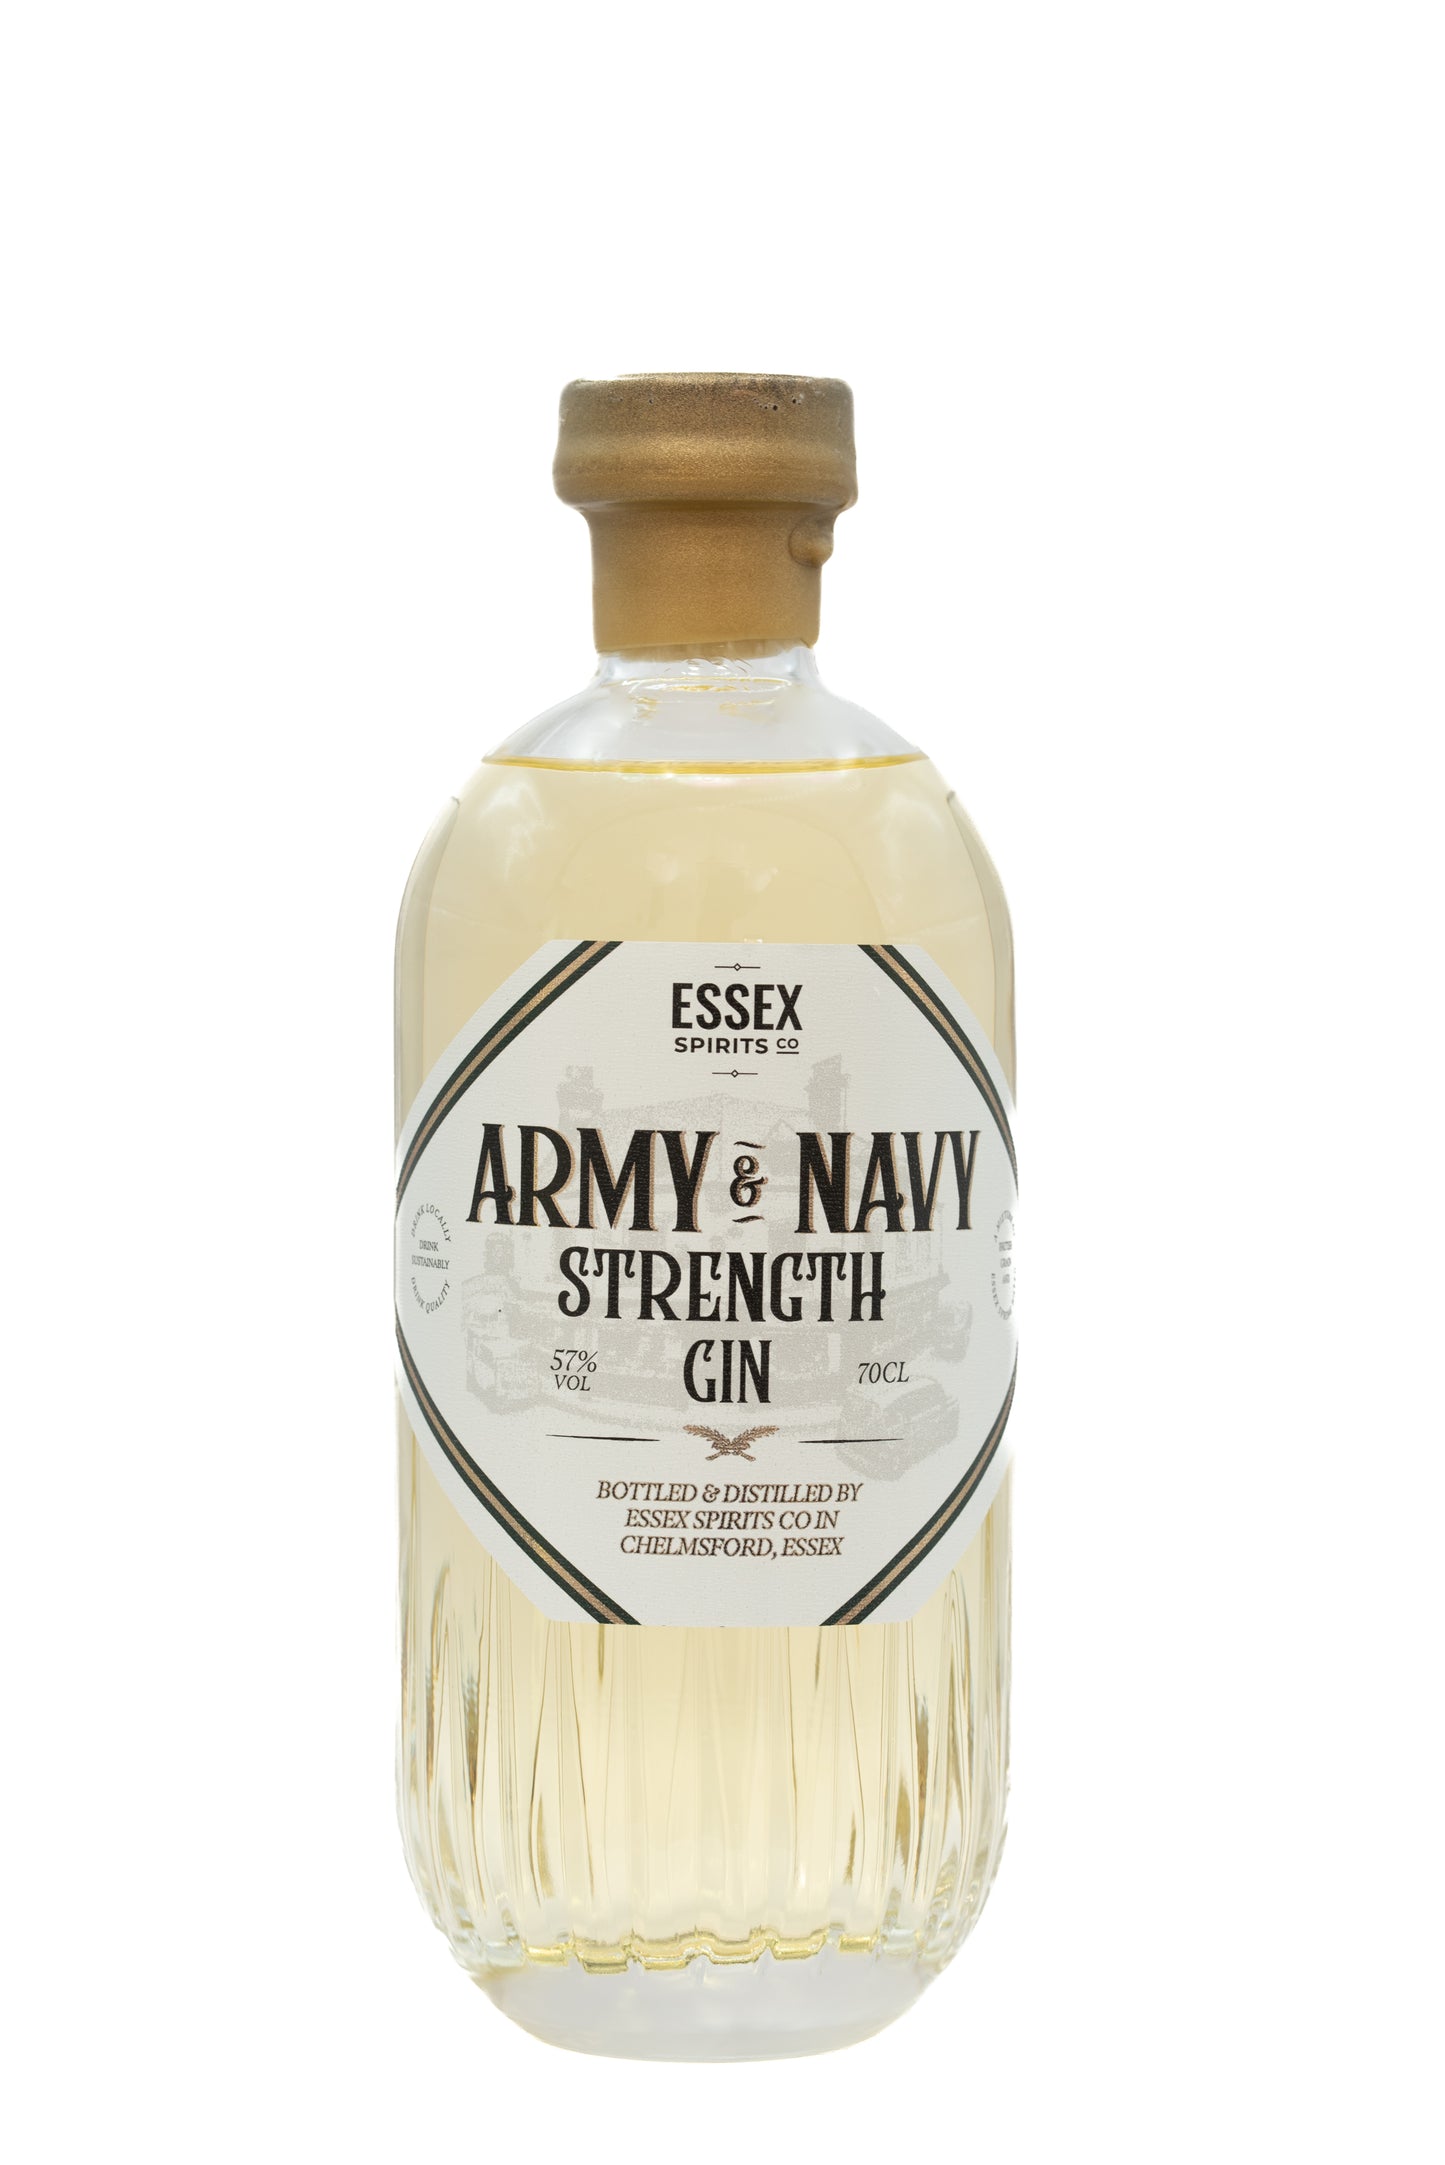 Army & Navy Strength Gin from Essex Spirits Company,  Chelmsford Distillery